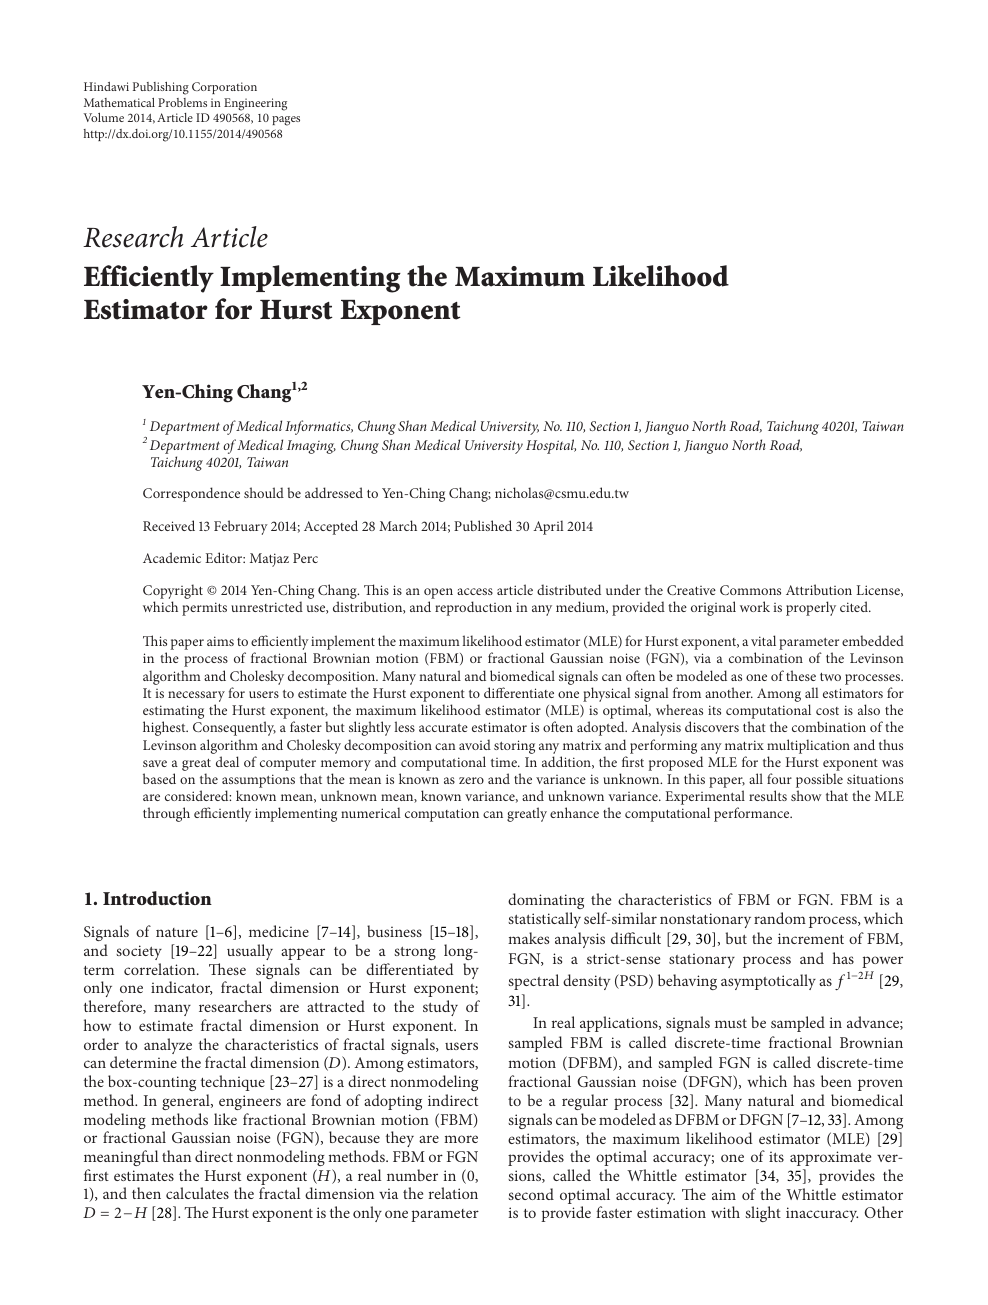 Efficiently Implementing The Maximum Likelihood Estimator For Hurst Exponent Topic Of Research Paper In Mathematics Download Scholarly Article Pdf And Read For Free On Cyberleninka Open Science Hub